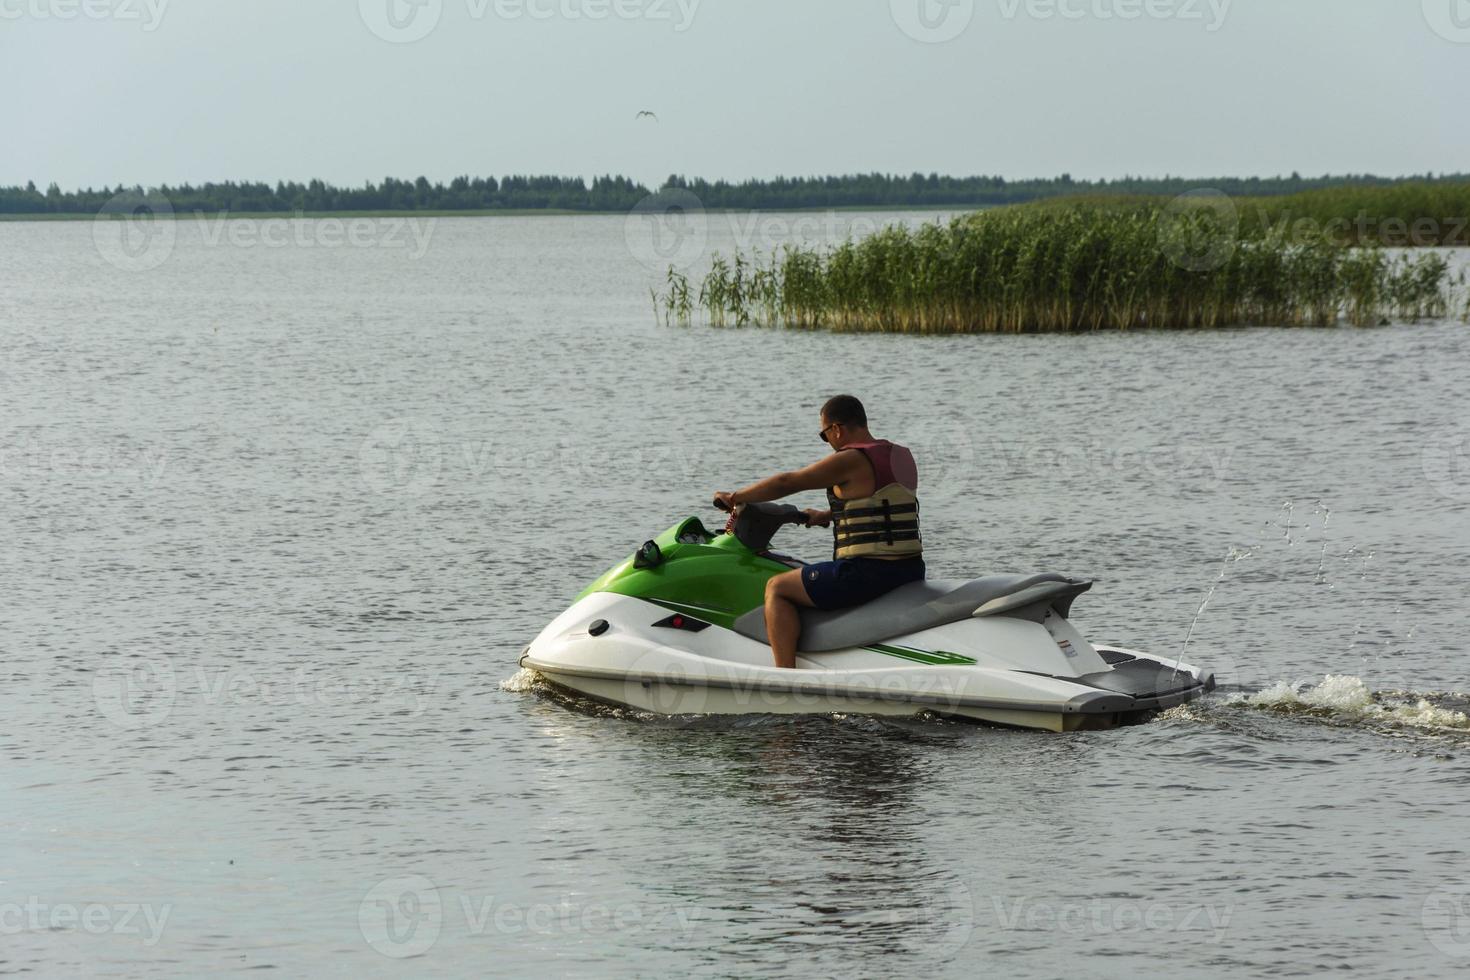 A young guy rides a jet ski on the lake, a man rides a jet ski, active lifestyle, summer, water, heat, vacation photo